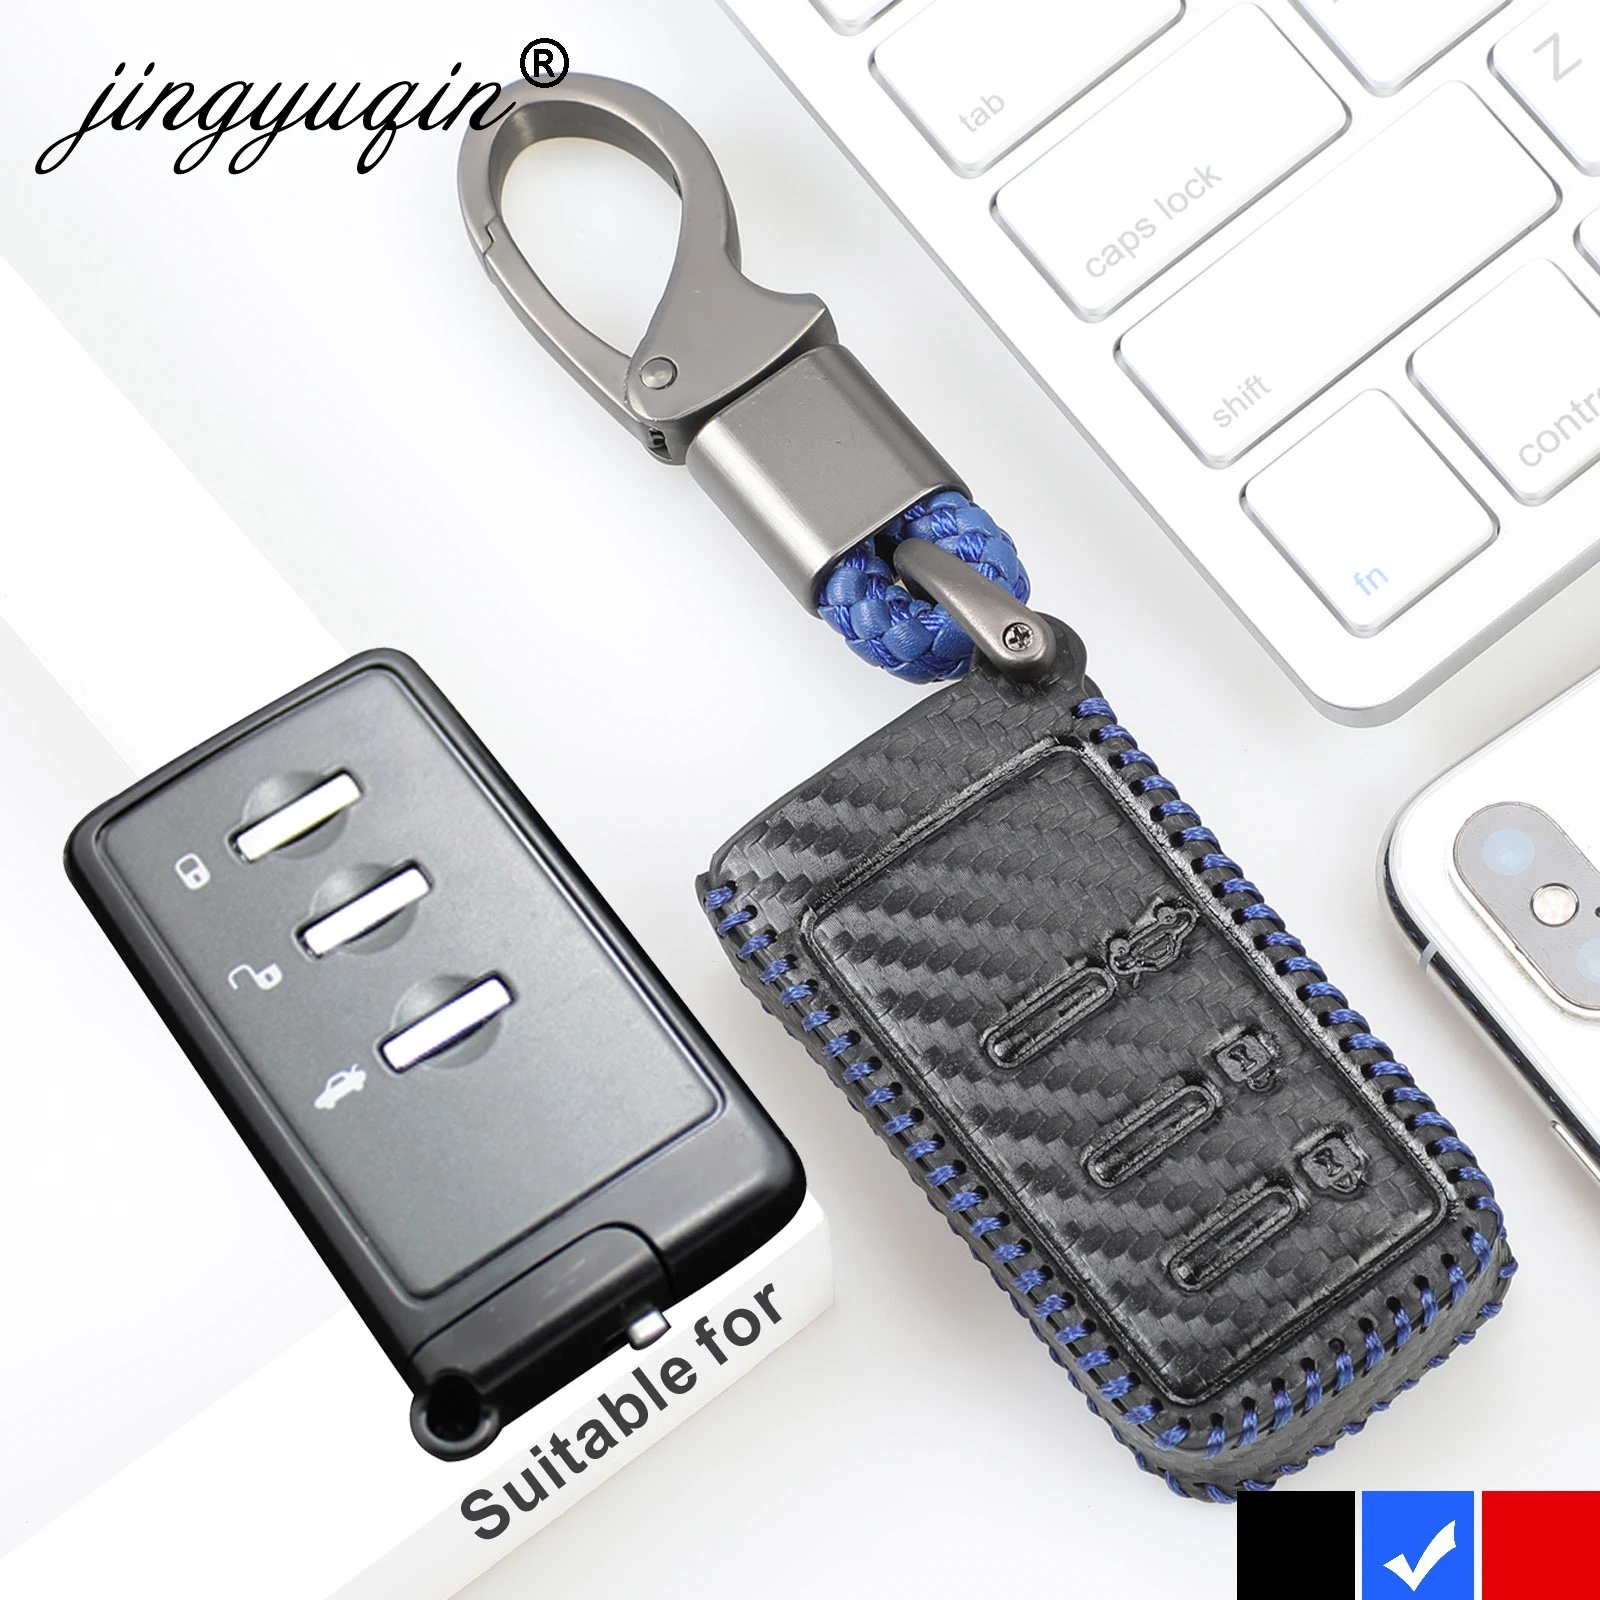 jingyuqin Fiber Carbon Leather key Cover Case For Subaru forester Outback Legacy XV 3 Button Smart Fob Car Accessories